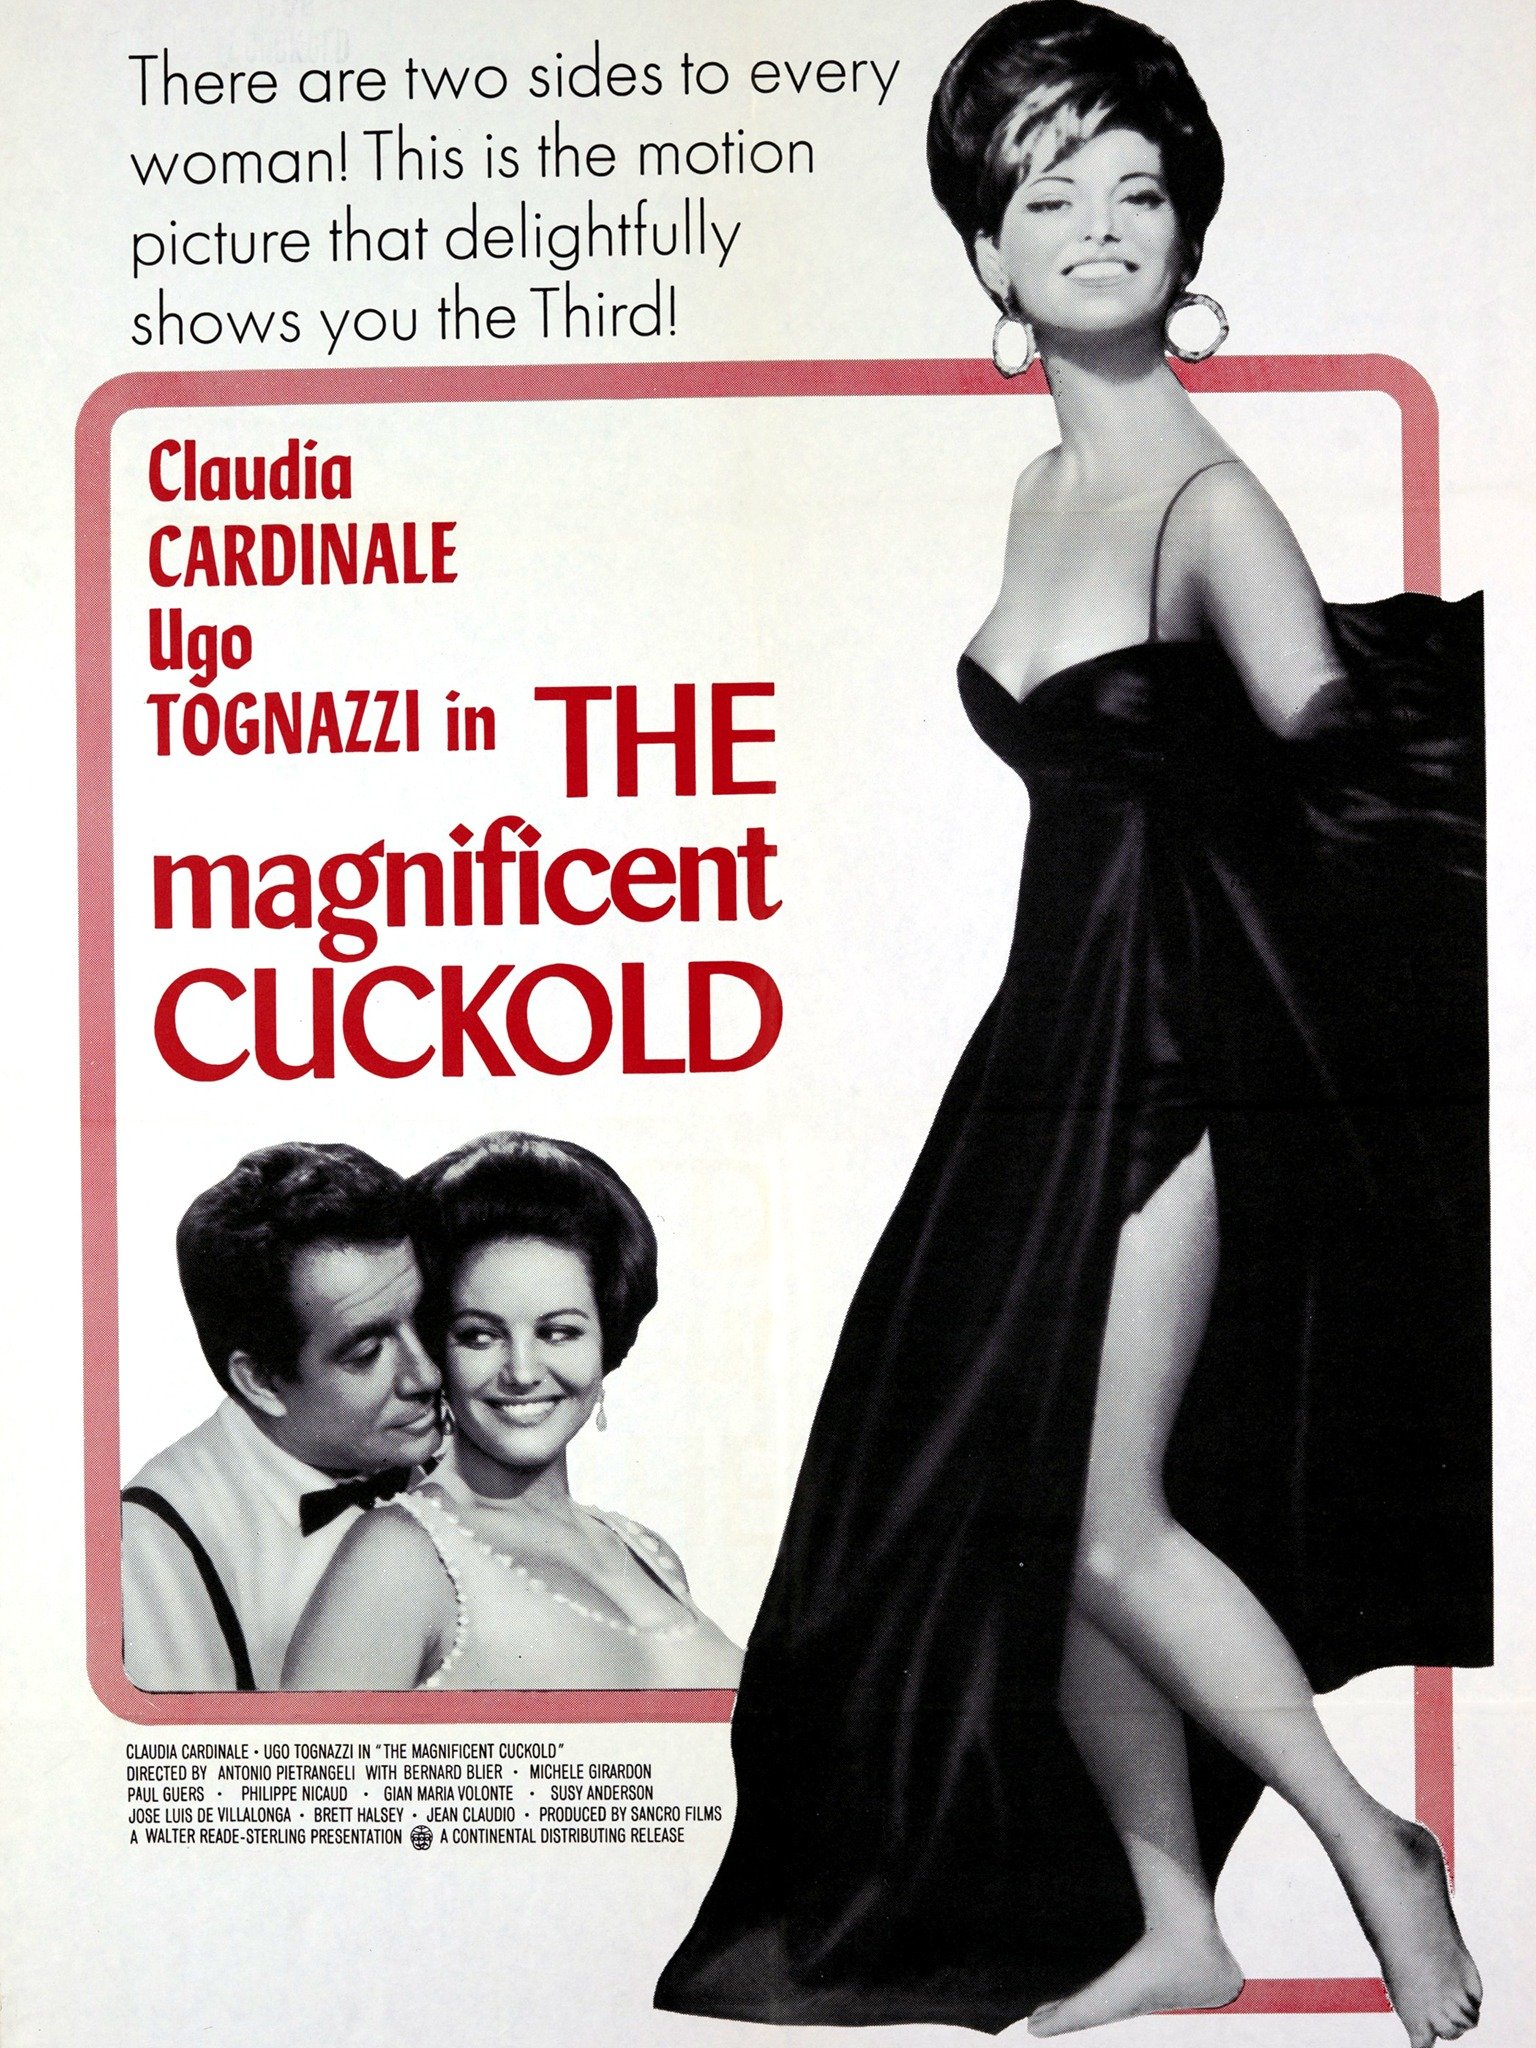 The Magnificent Cuckold image